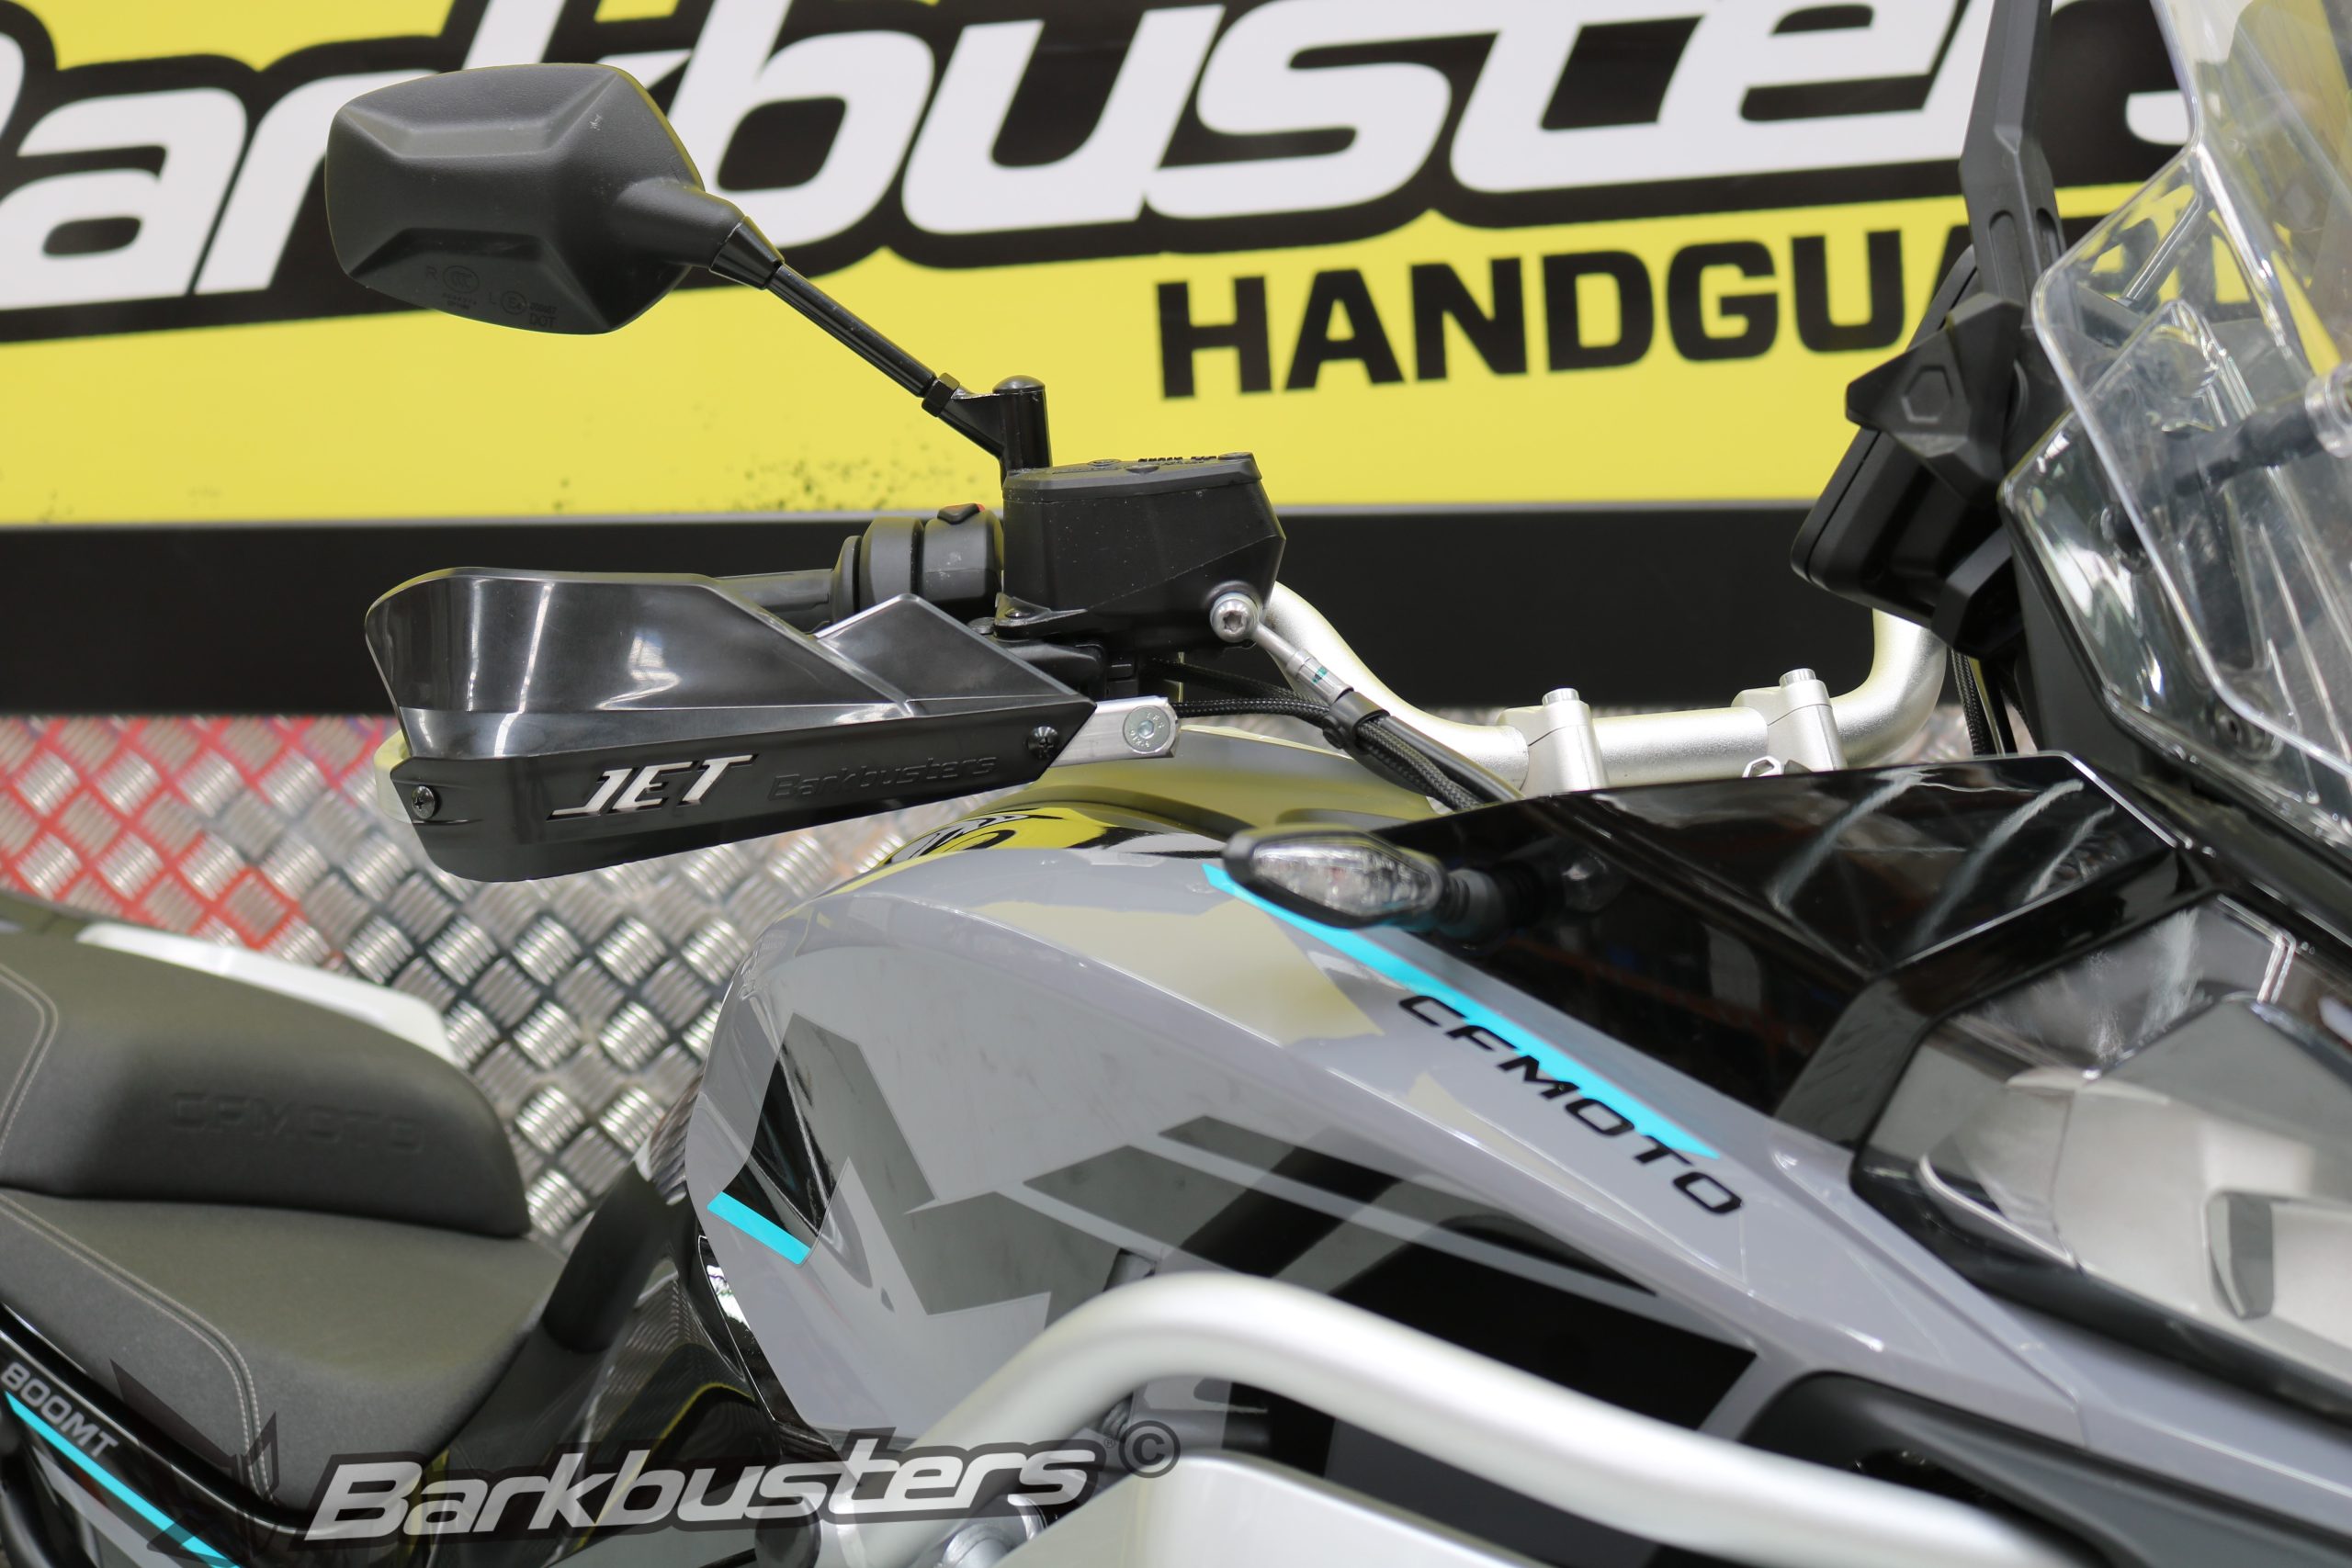 BARKBUSTERS Handguard Hardware Kit (Code: BHG-036) fitted to CF MOTO with JET guards (Code: BCF-003) sold separately